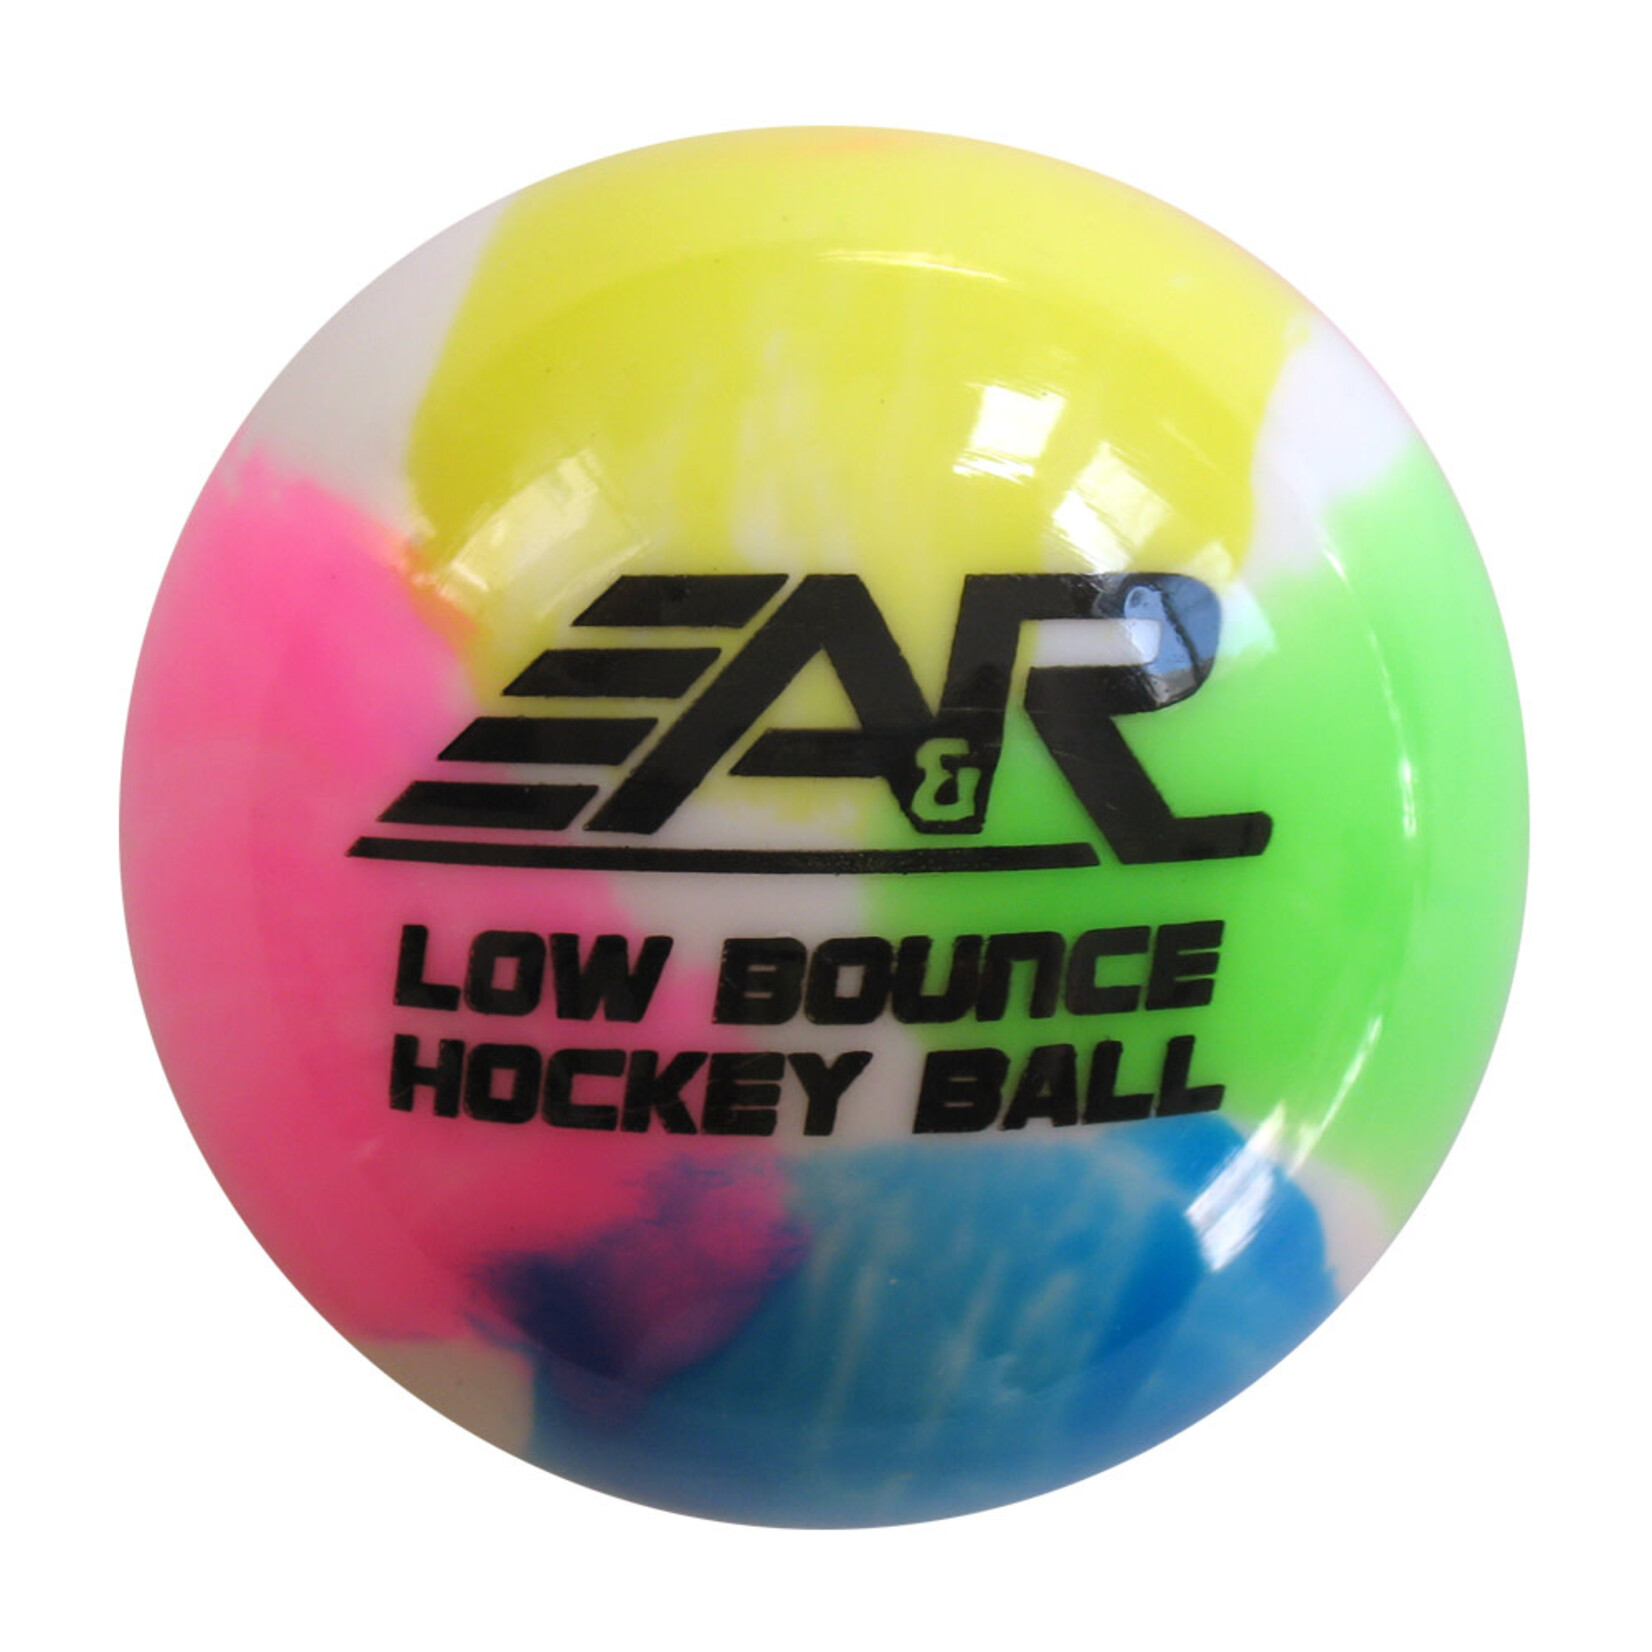 A&R A&R Low Bounce Tie-Dye Hockey Balls - 4-Pack